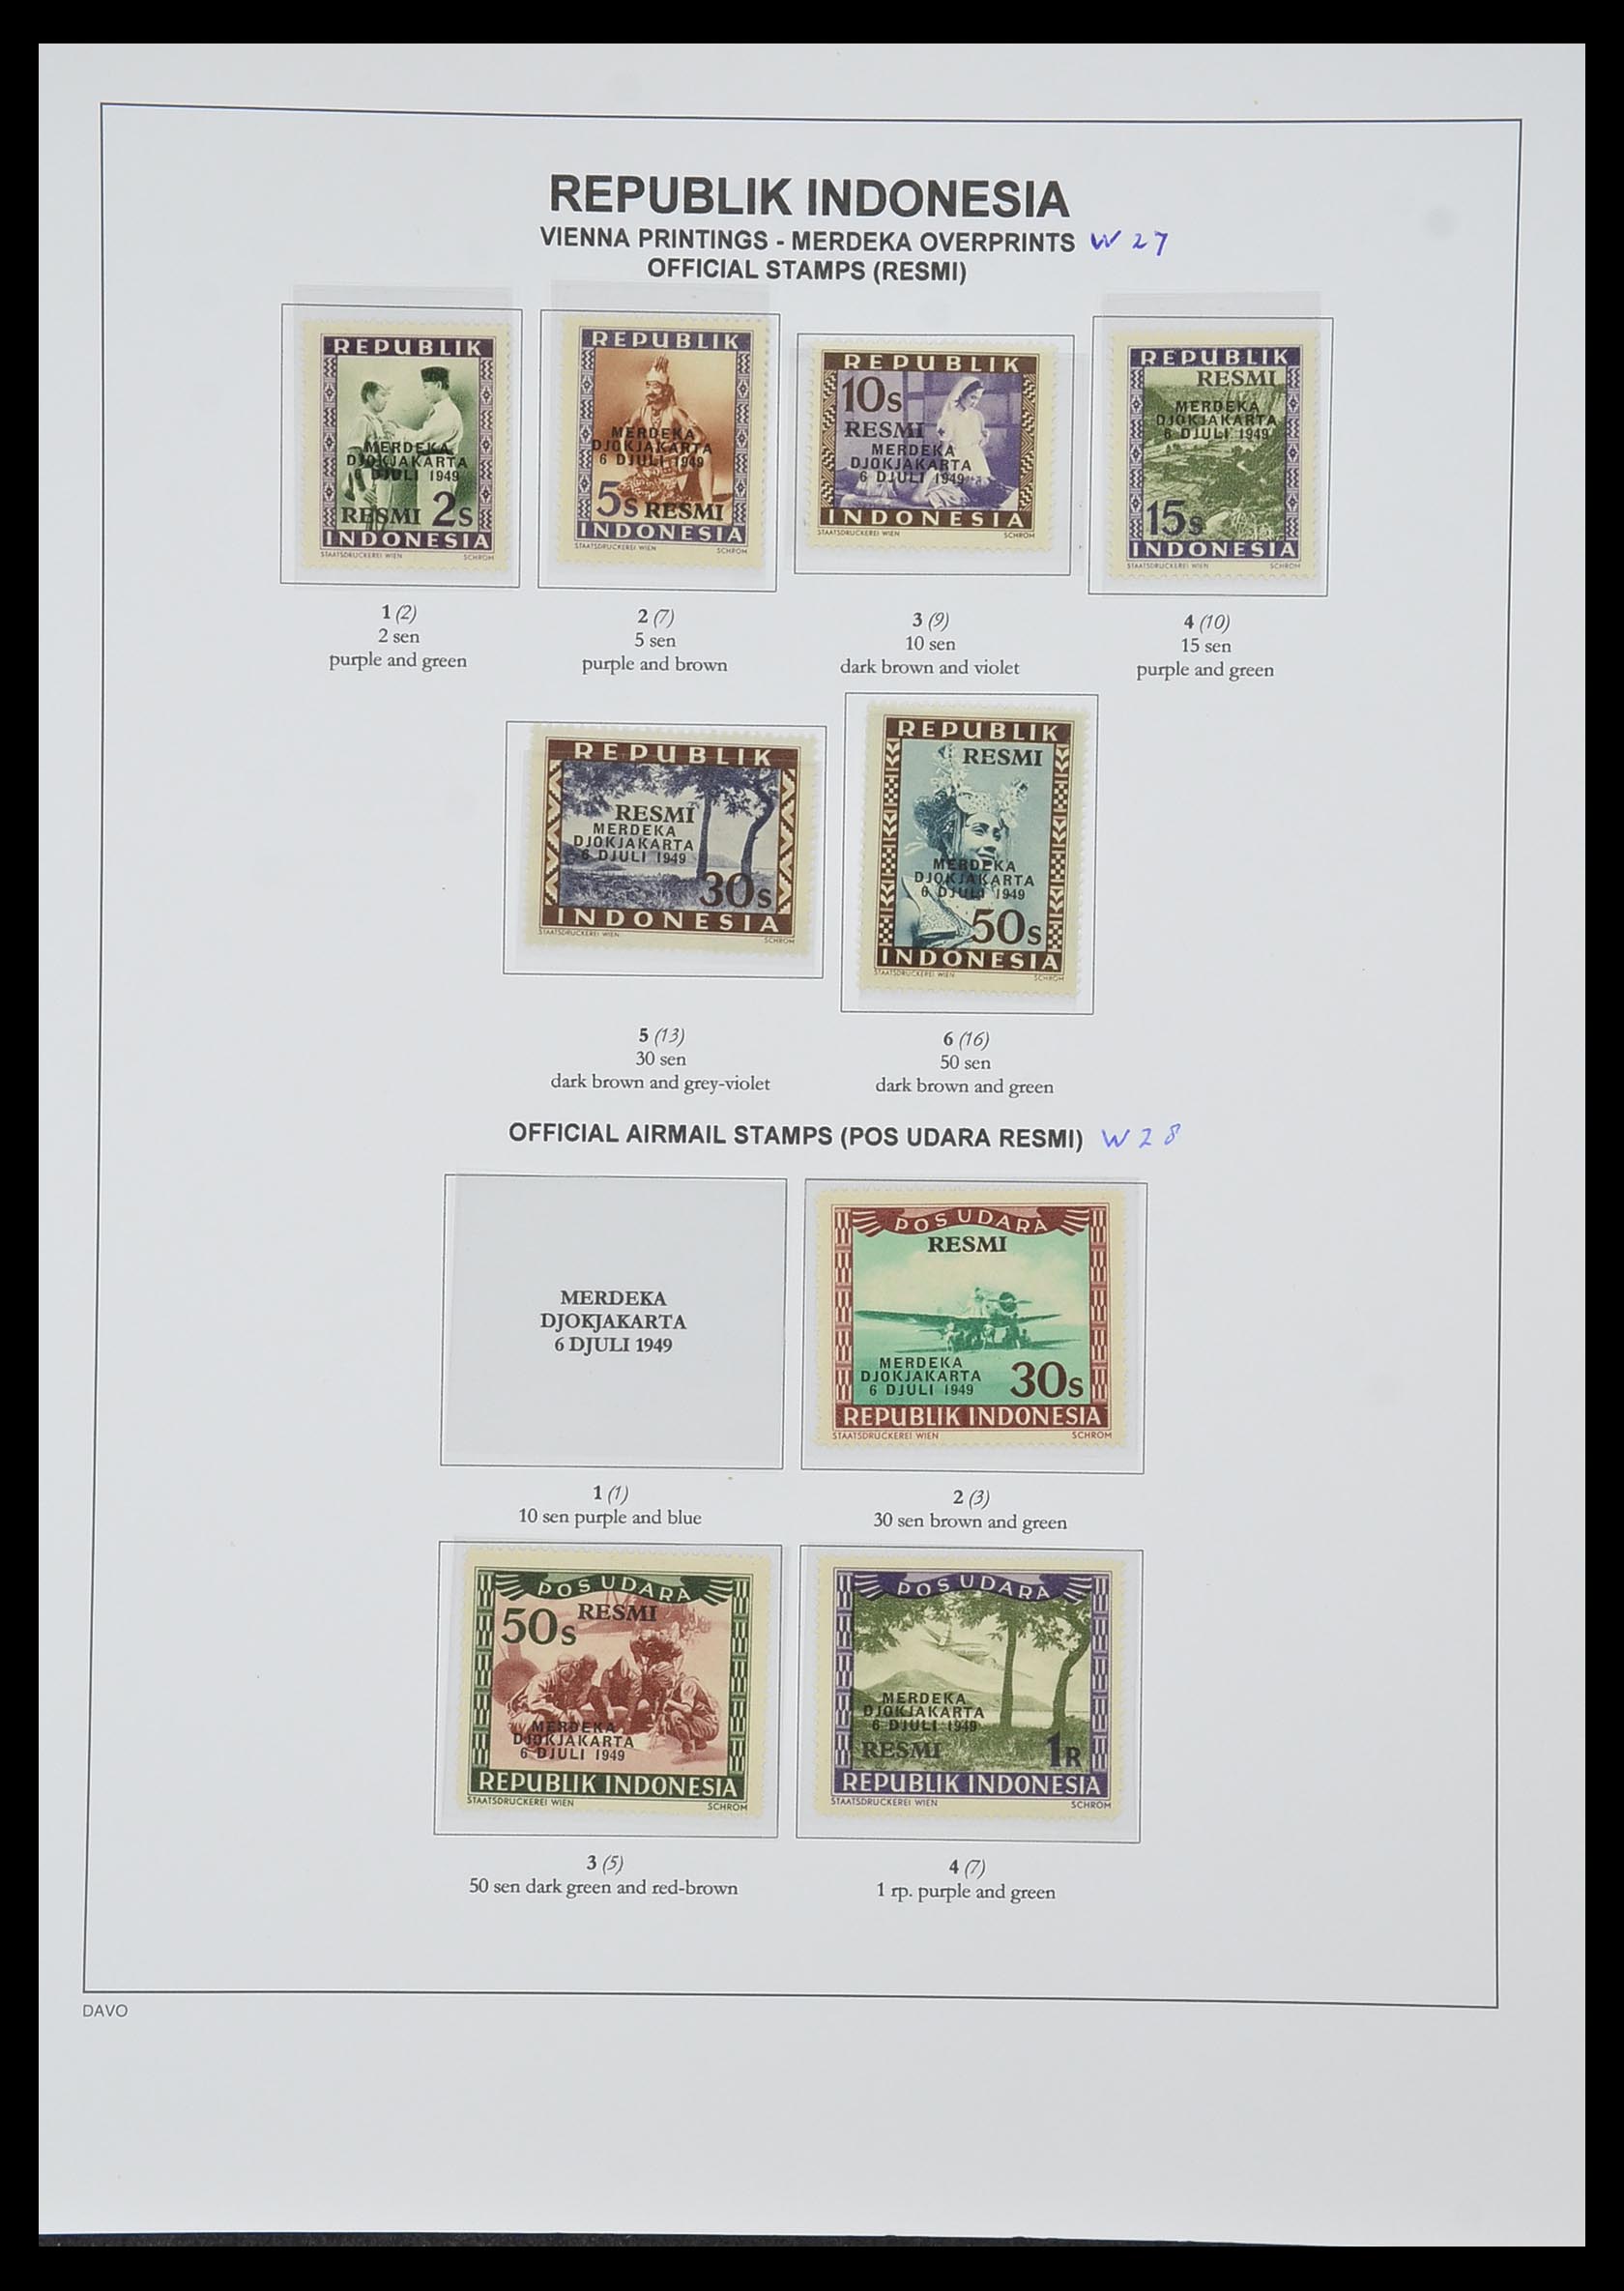 33988 041 - Stamp collection 33988 Vienna printings Indonesia.